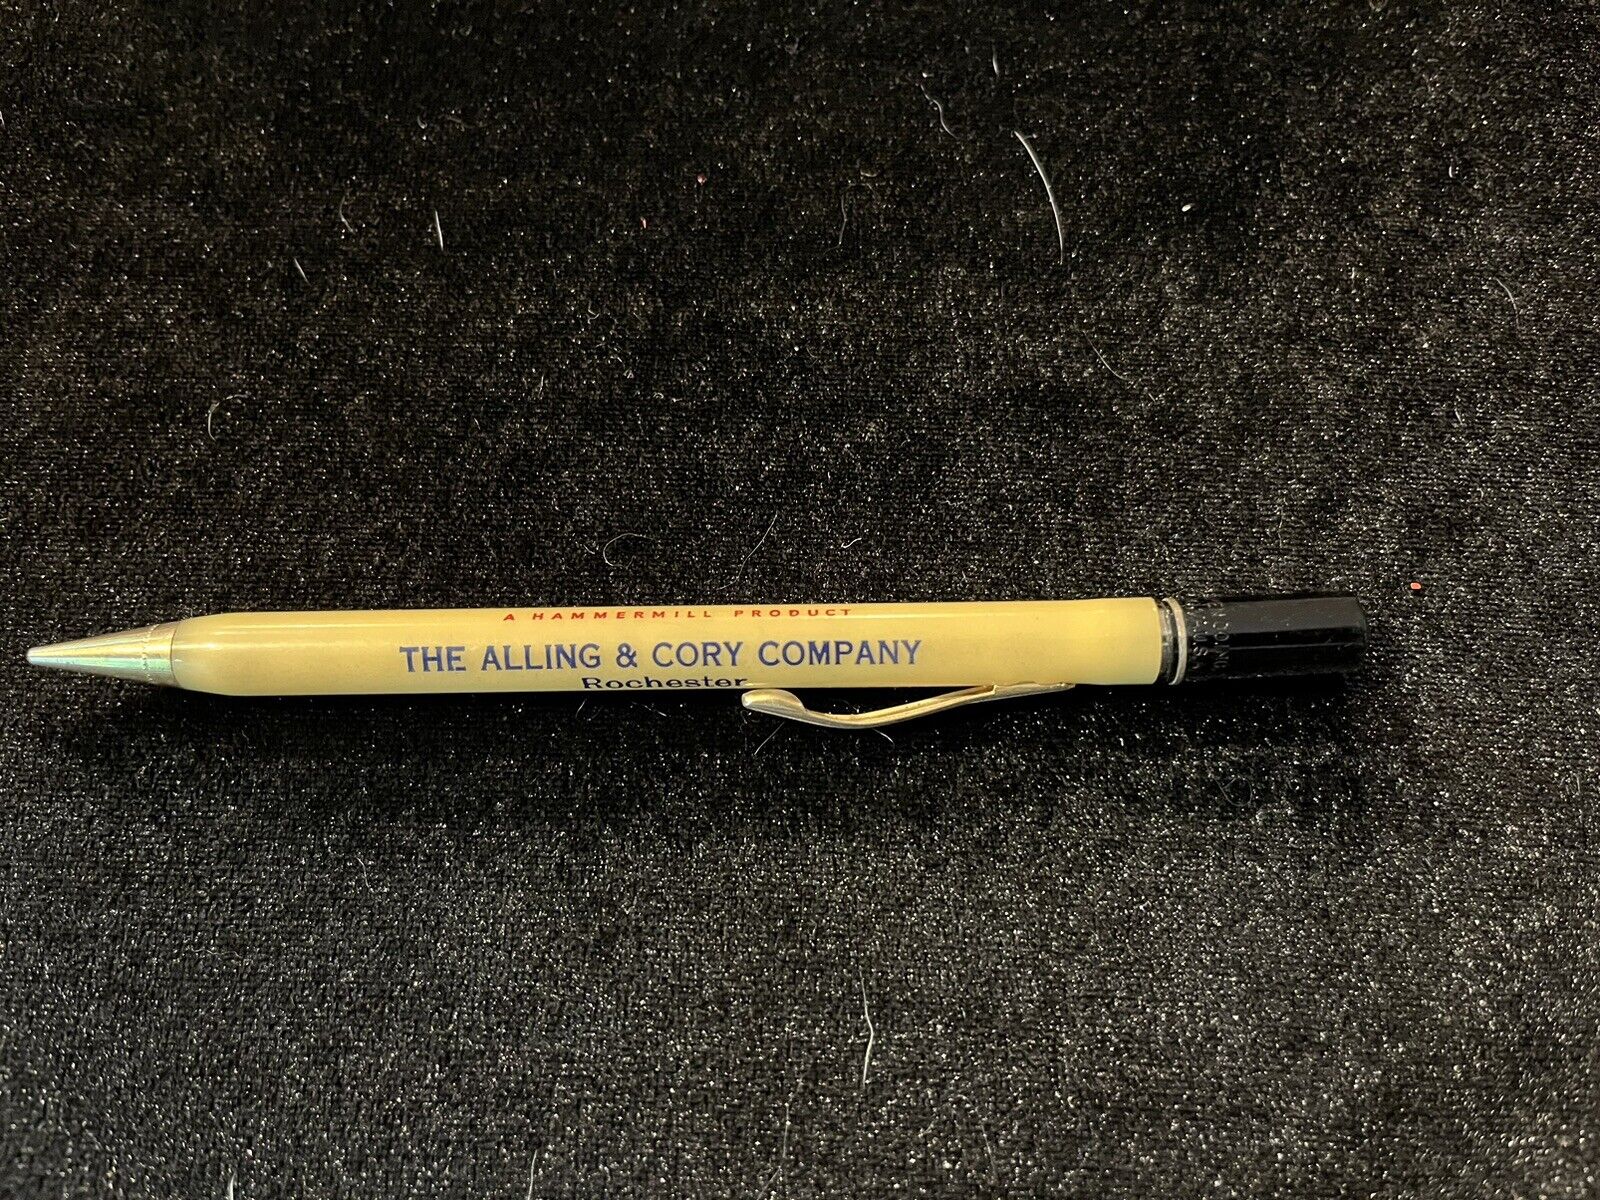 RARE, Vintage, “The Alling & Cory Company Rochester”, Mechanical Pencil